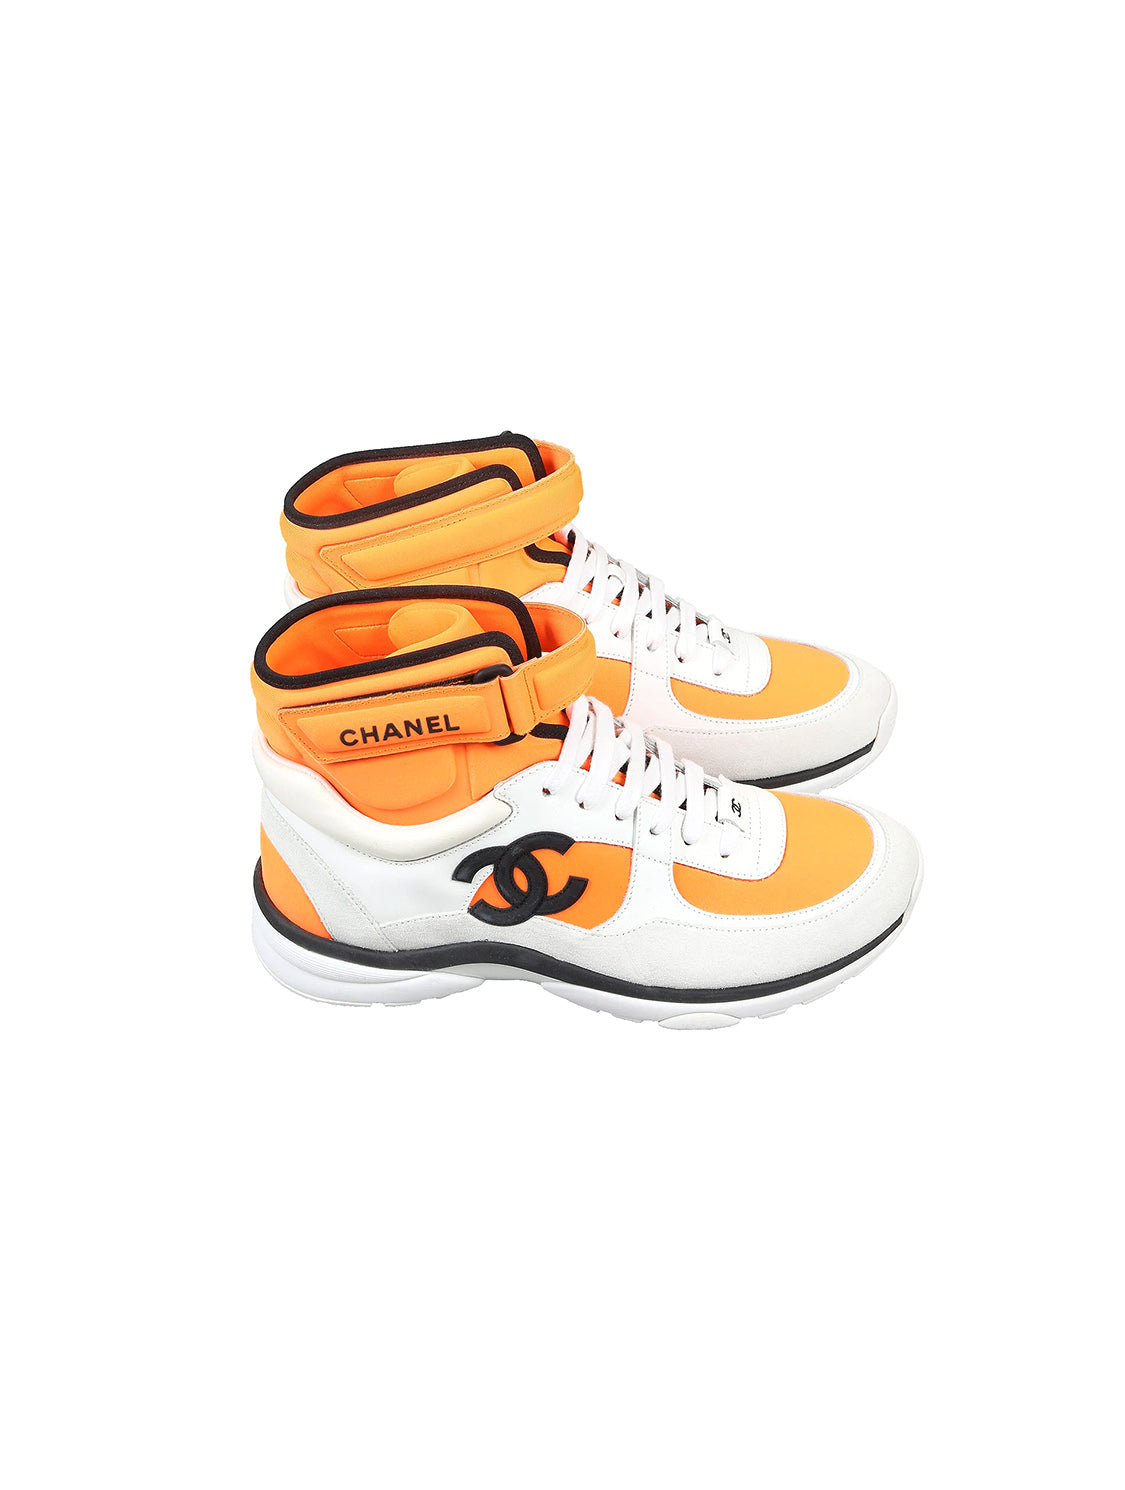 Chanel Orange Tweed And Suede CC Low Top Sneakers Size 365 Chanel  TLC